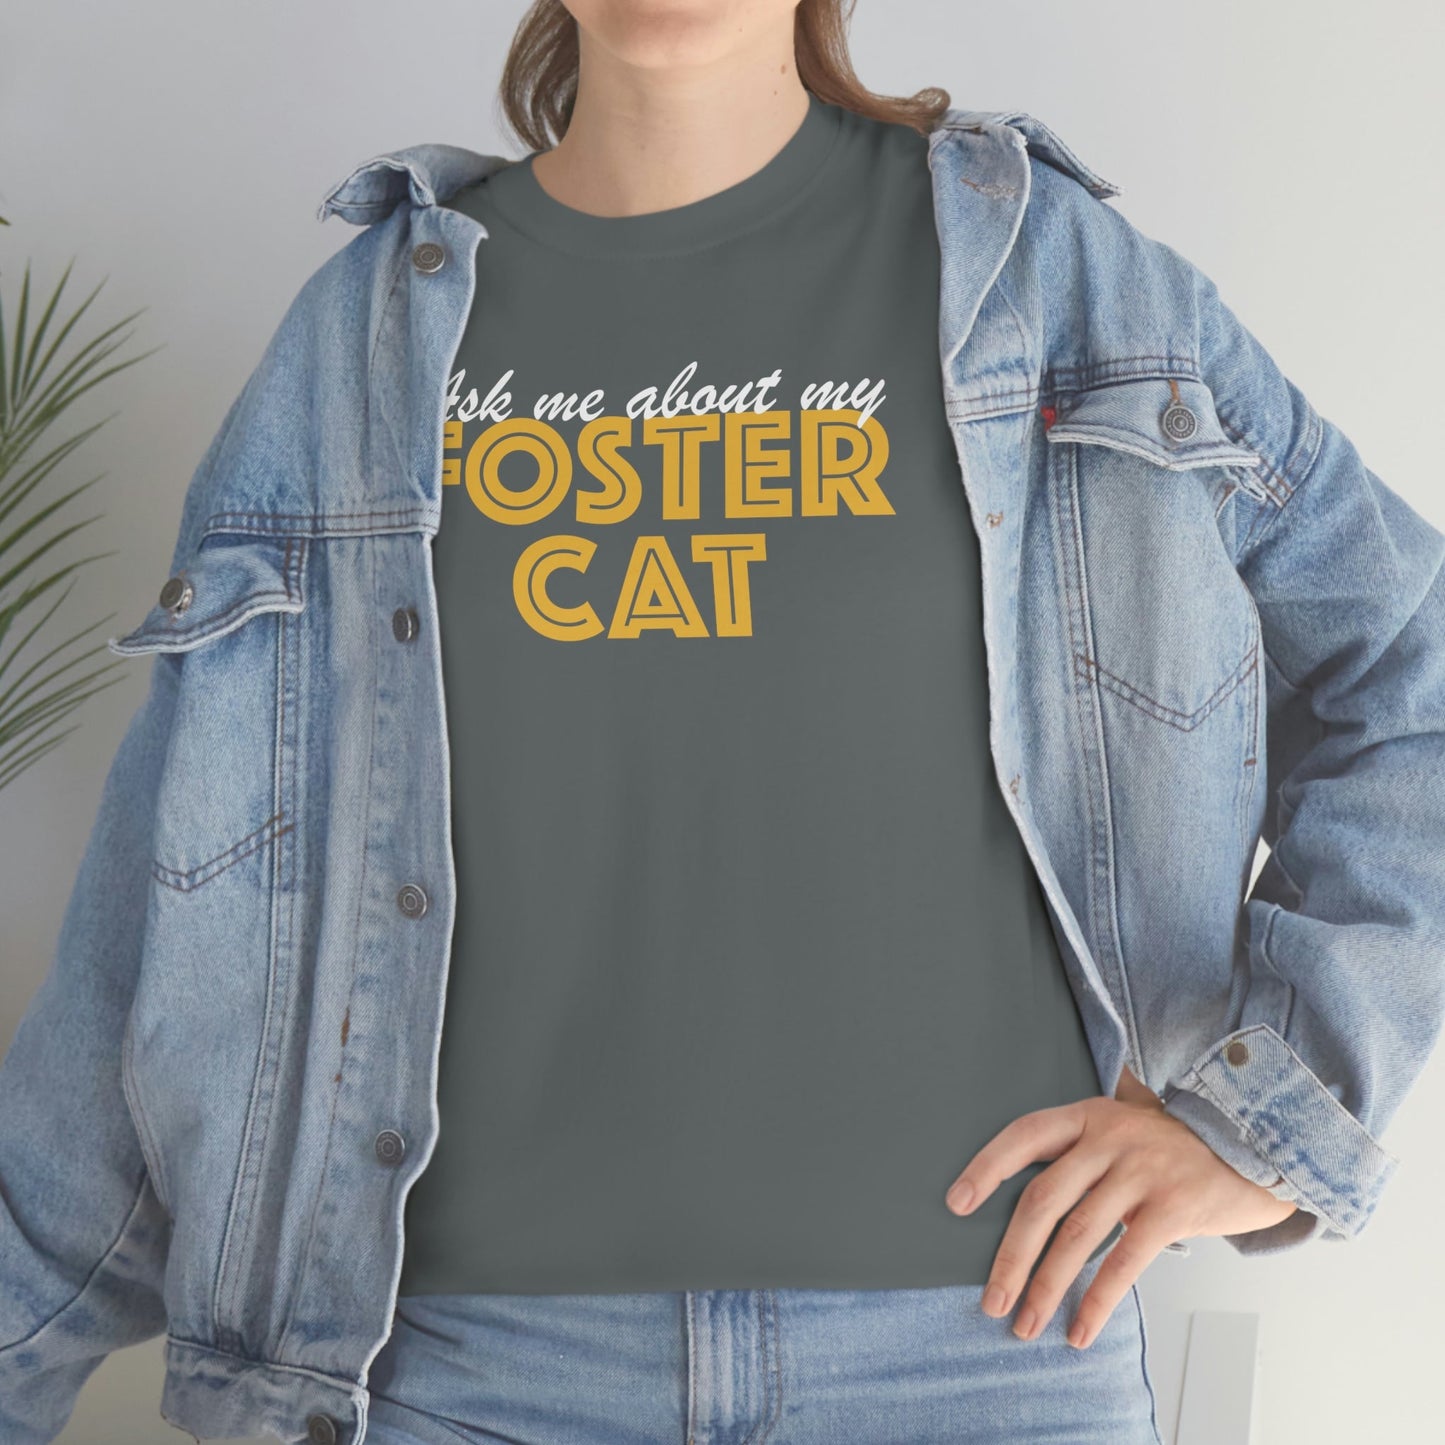 Ask Me About My Foster Cat | Text Tees - Detezi Designs-28634357353143980543